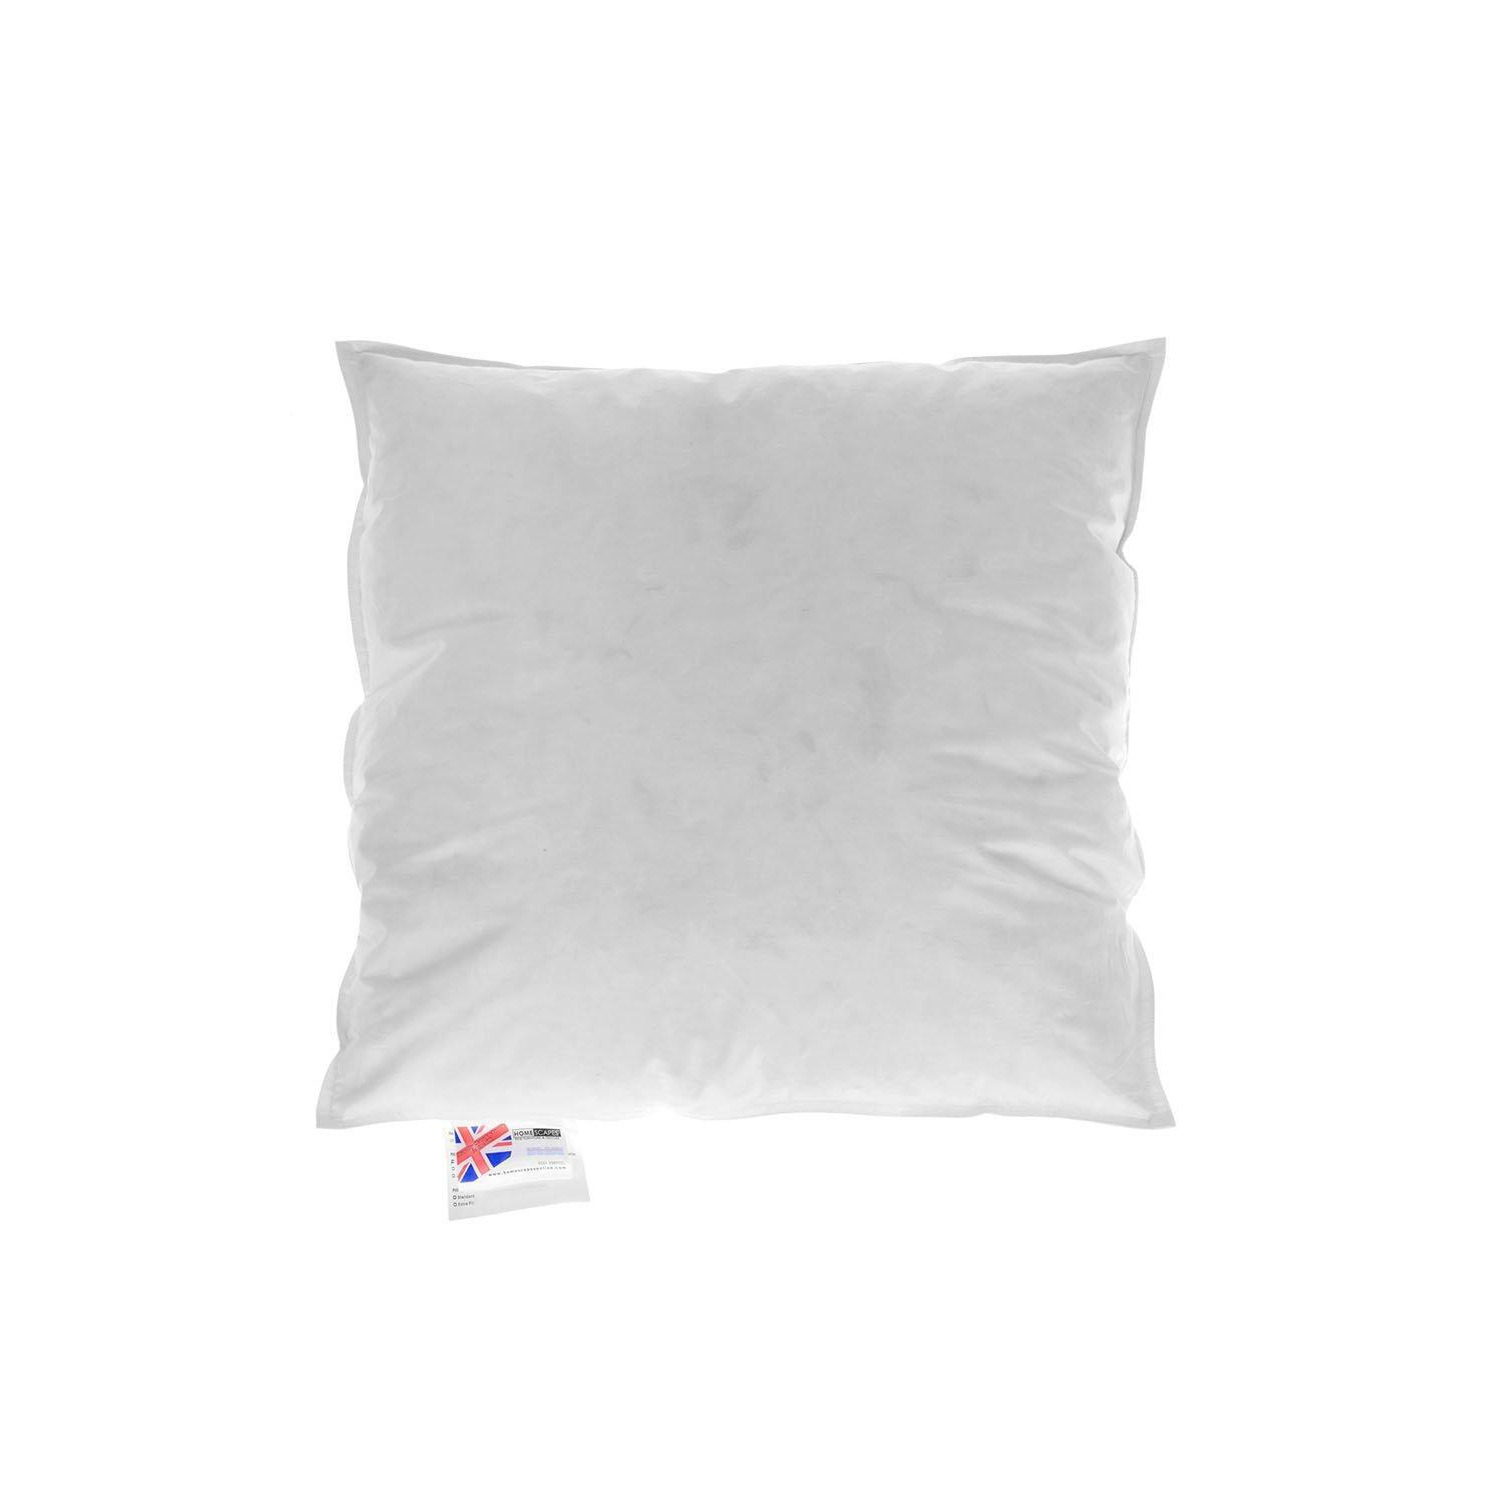 Goose Feather & Down Cushion Pad - image 1